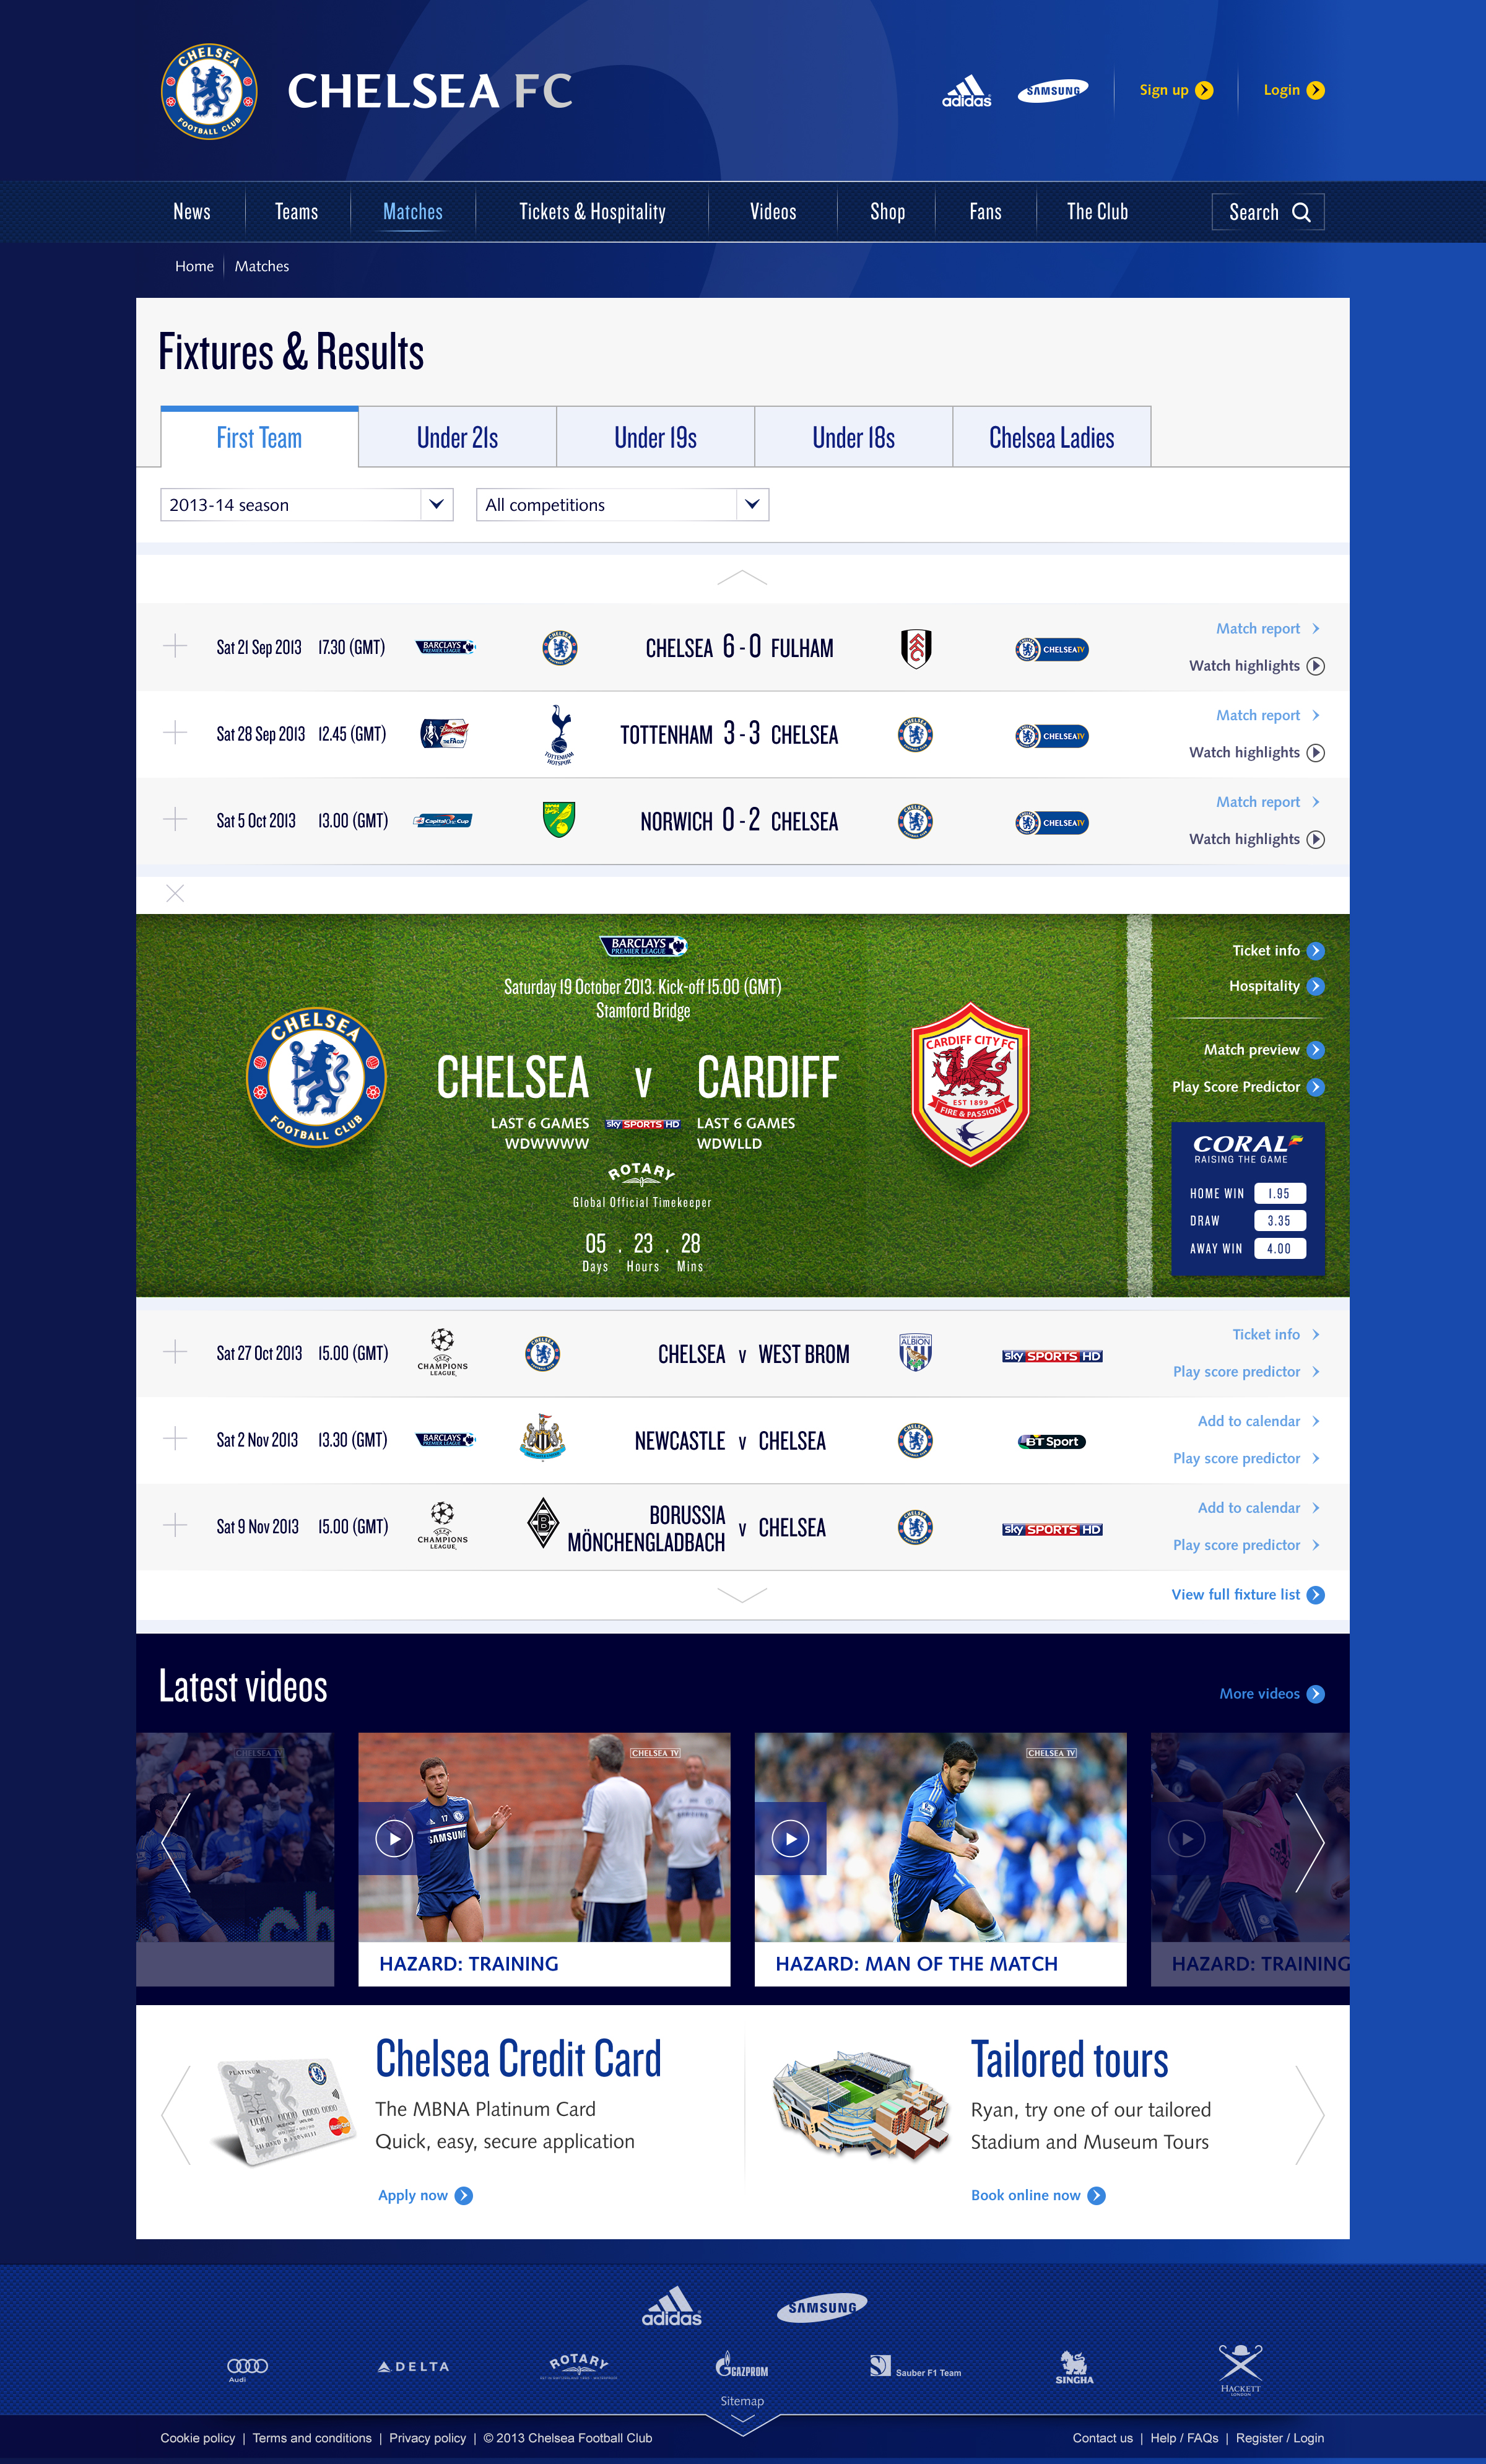 A webpage showing the available fixtures and results of the upcoming games